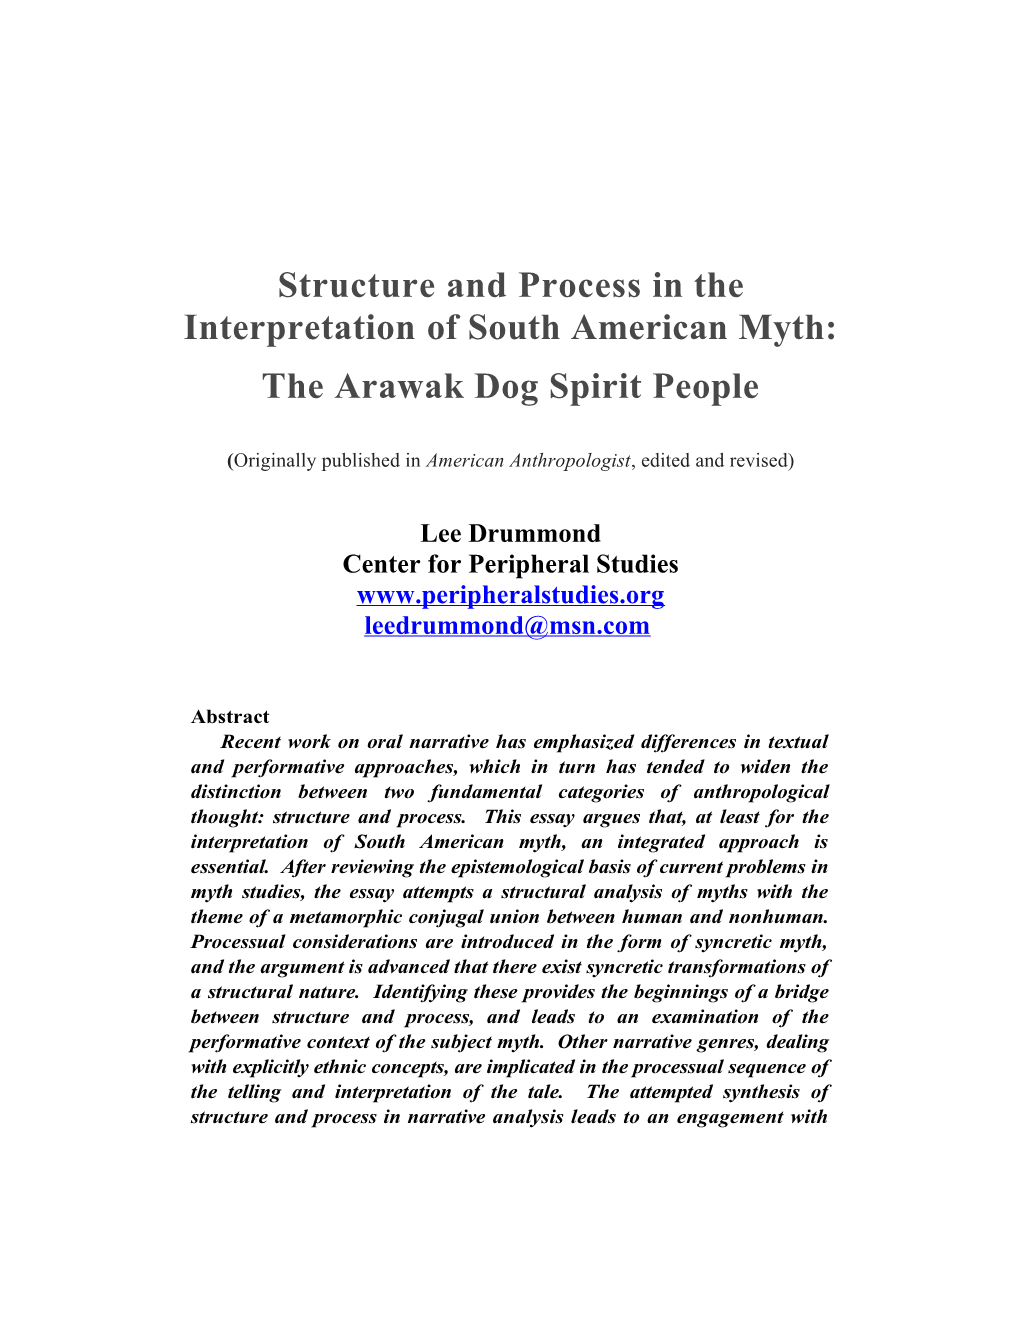 Structure and Process in the Interpretation